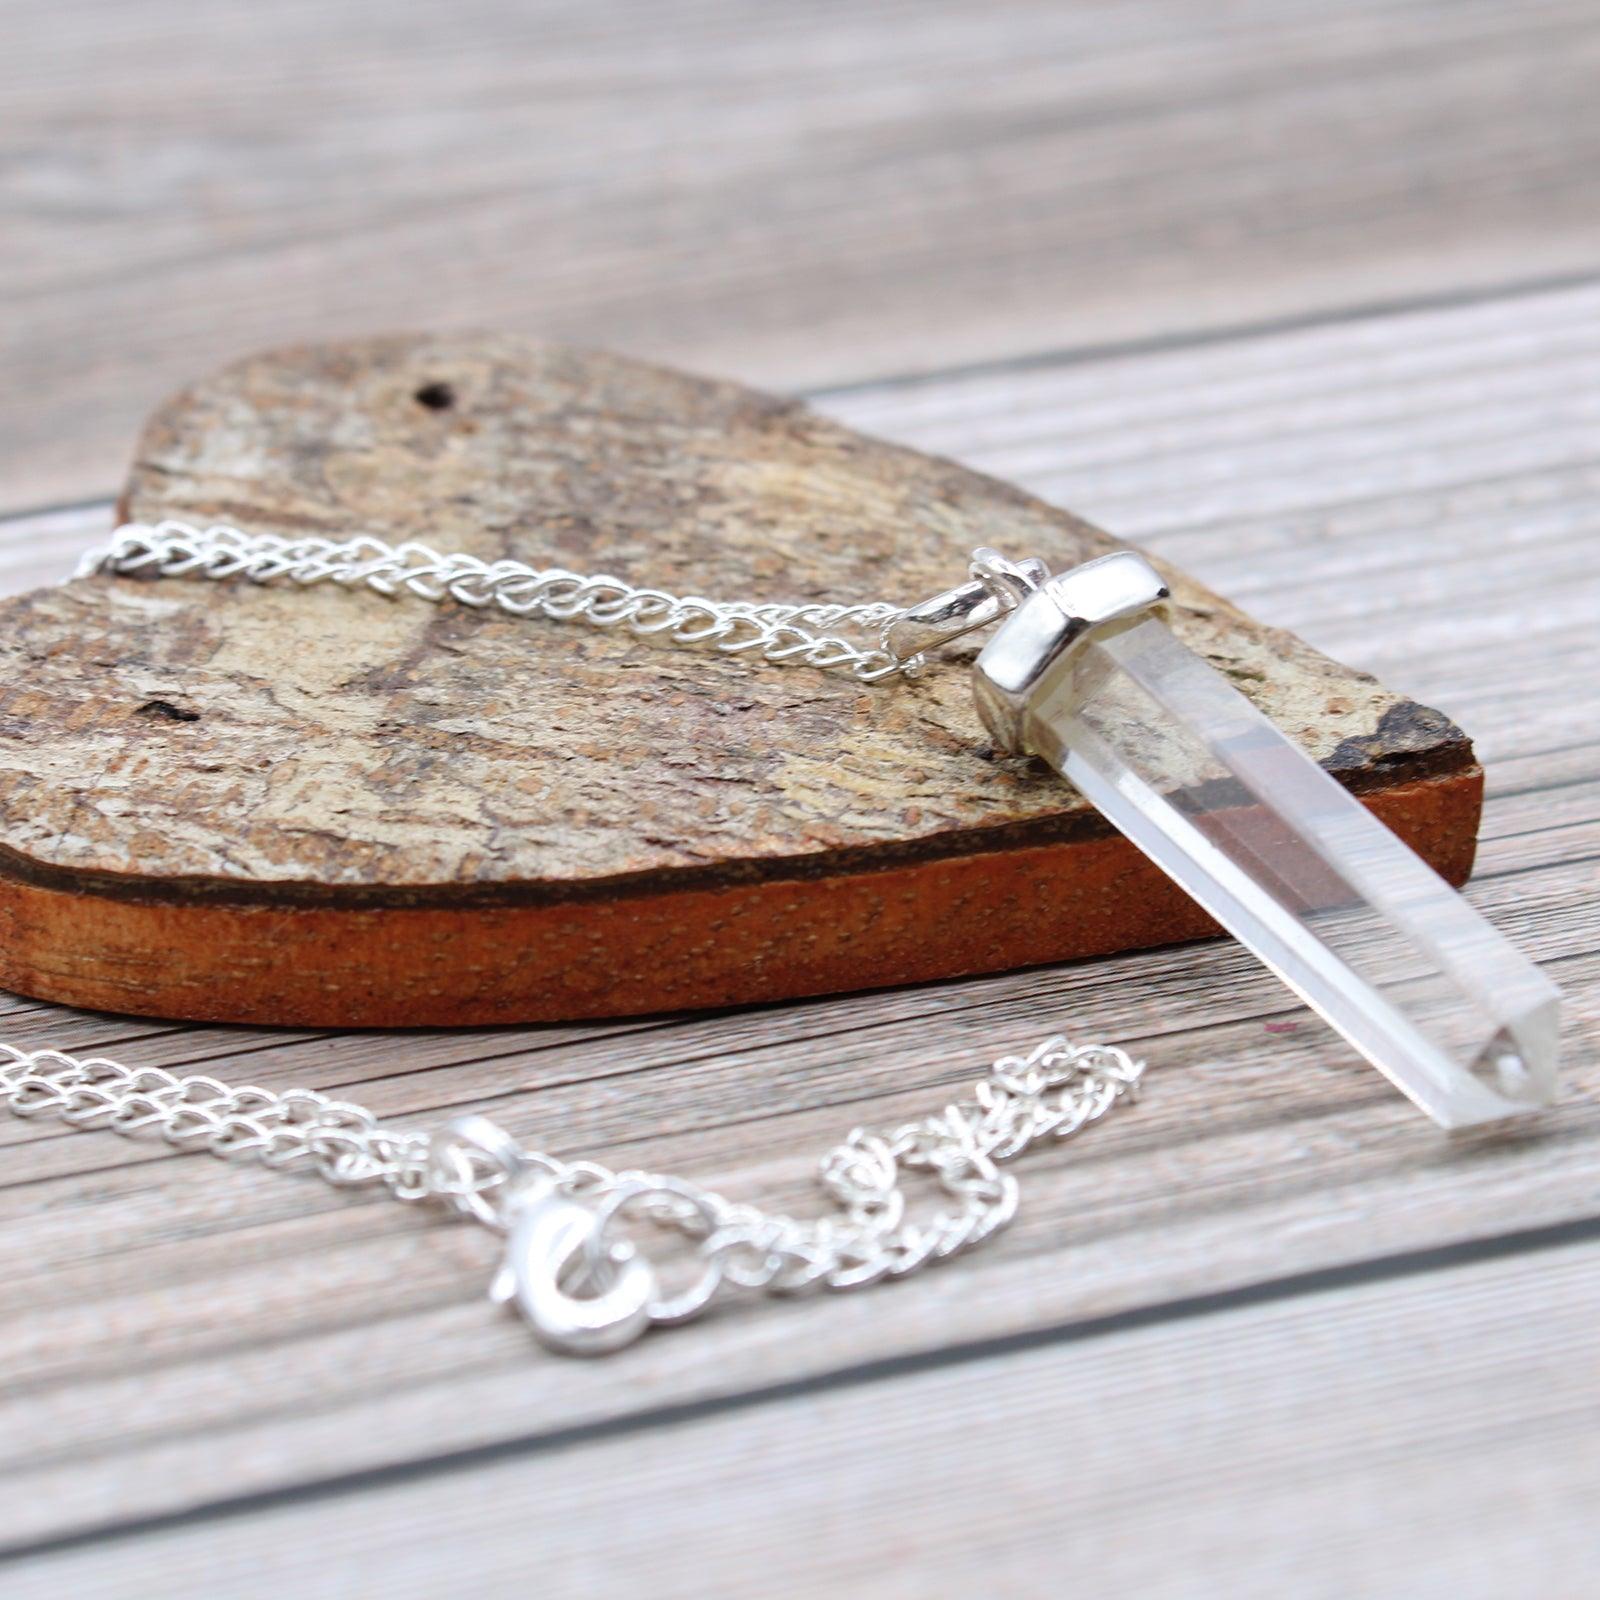 Gemstone Classic Point Pendant Necklace - Rock Quartz - Free Pouch - Home Inspired Gifts